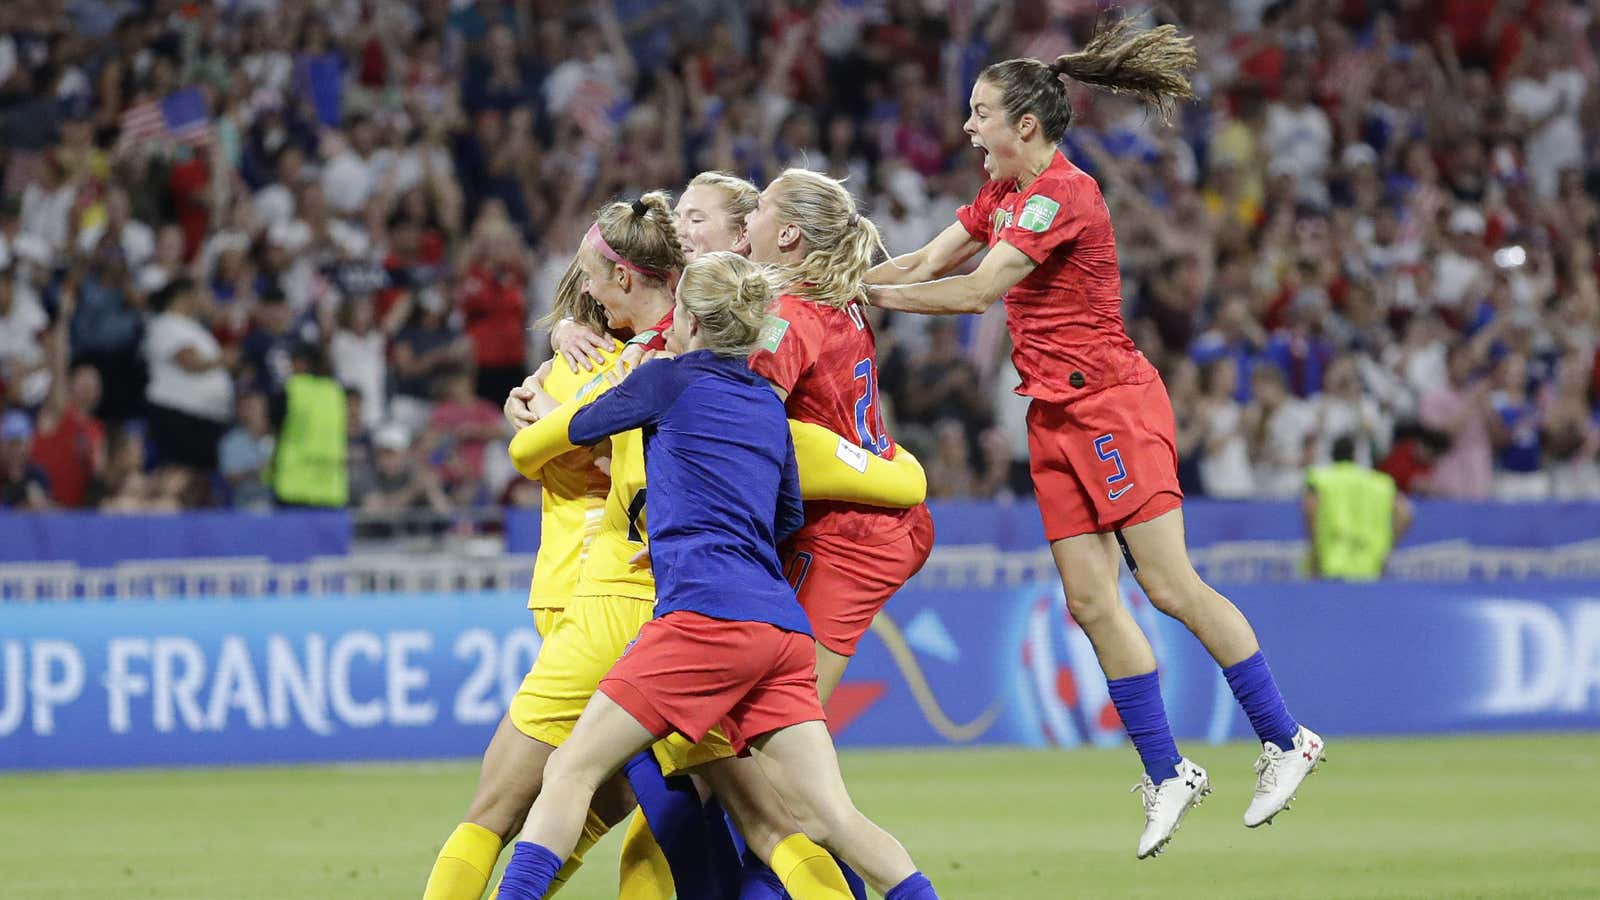 US players have high expectations at Women’s World Cup.